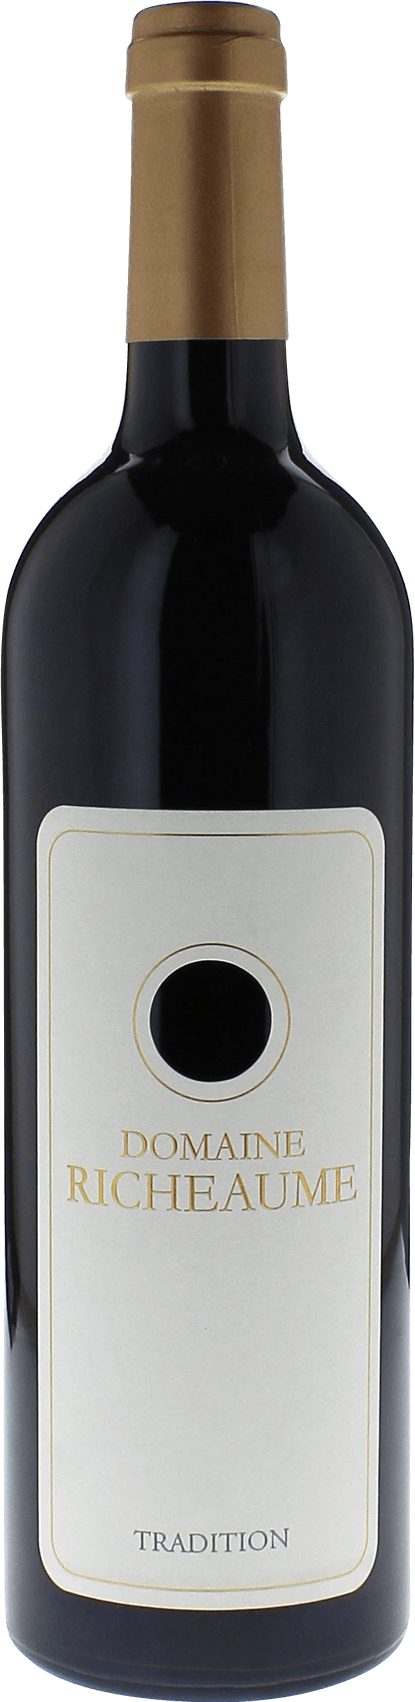 Domaine richeaume tradition 2016  IGP Mditerrane, Provence